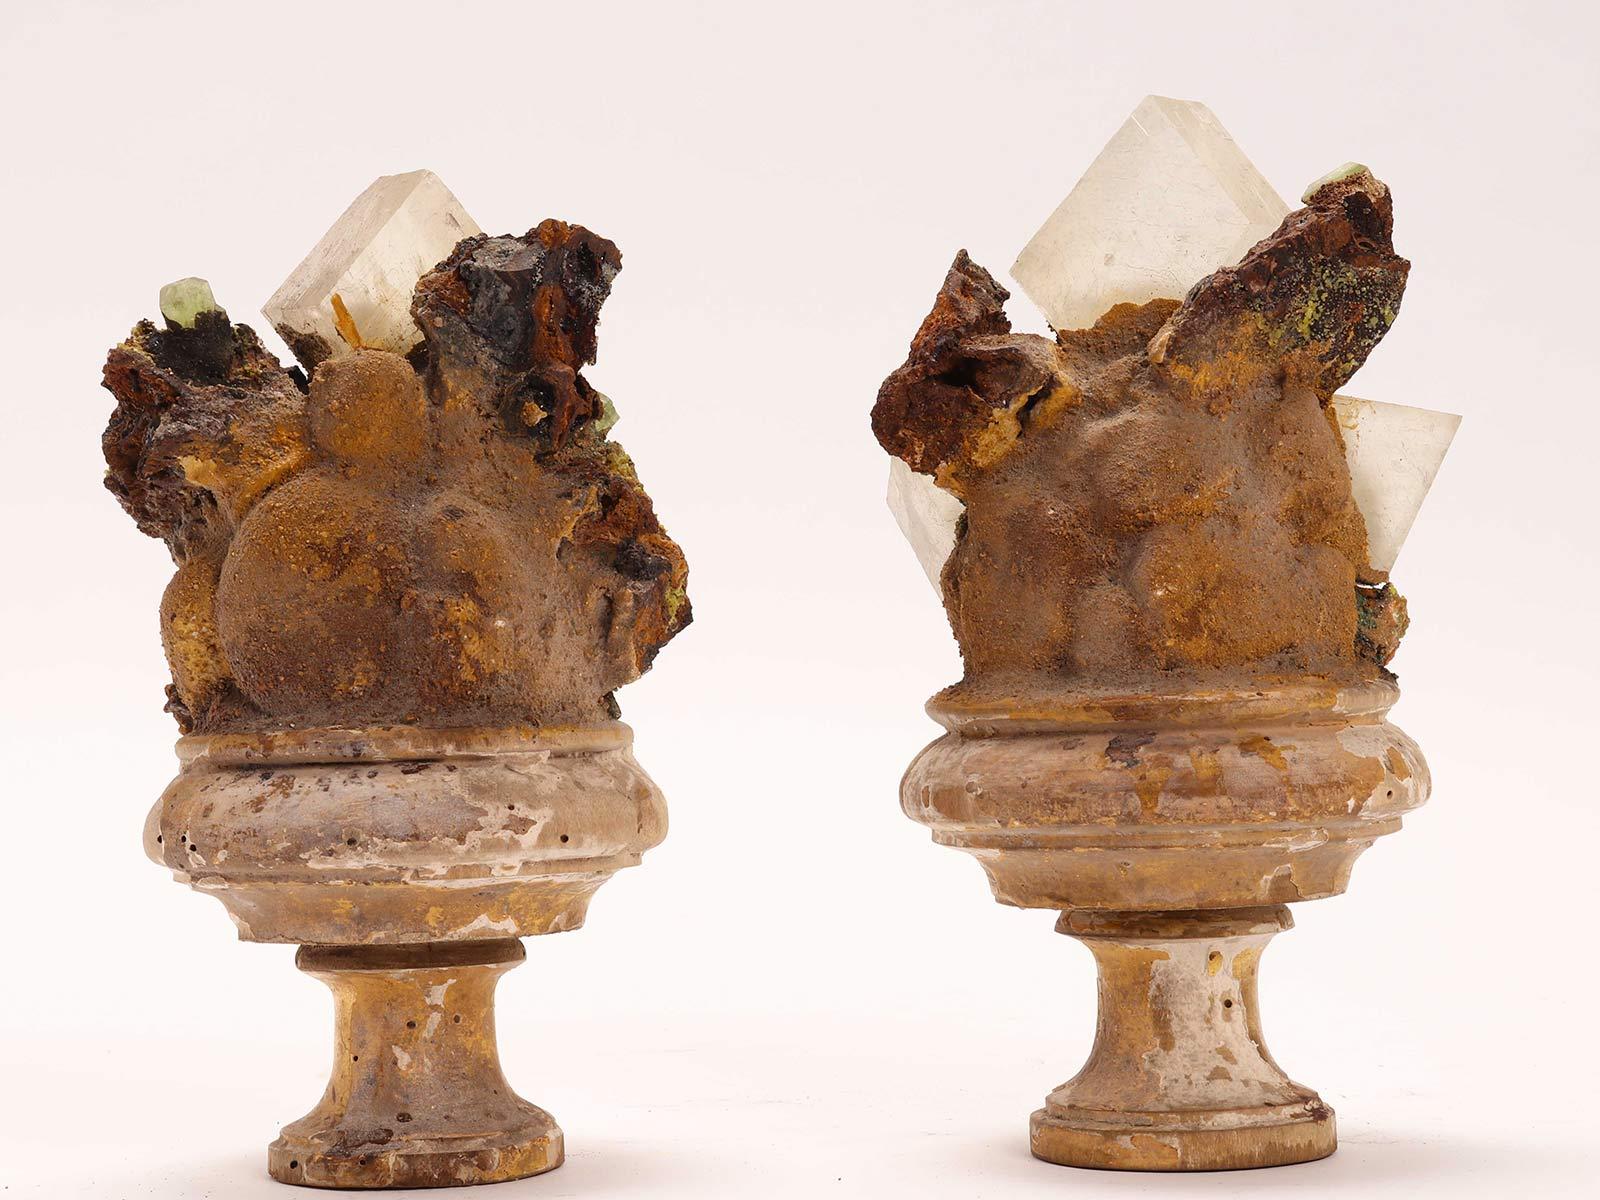 Late 19th Century Natural Specimen a Pair of Druzes with Crystals, Italy 1880, Specimen